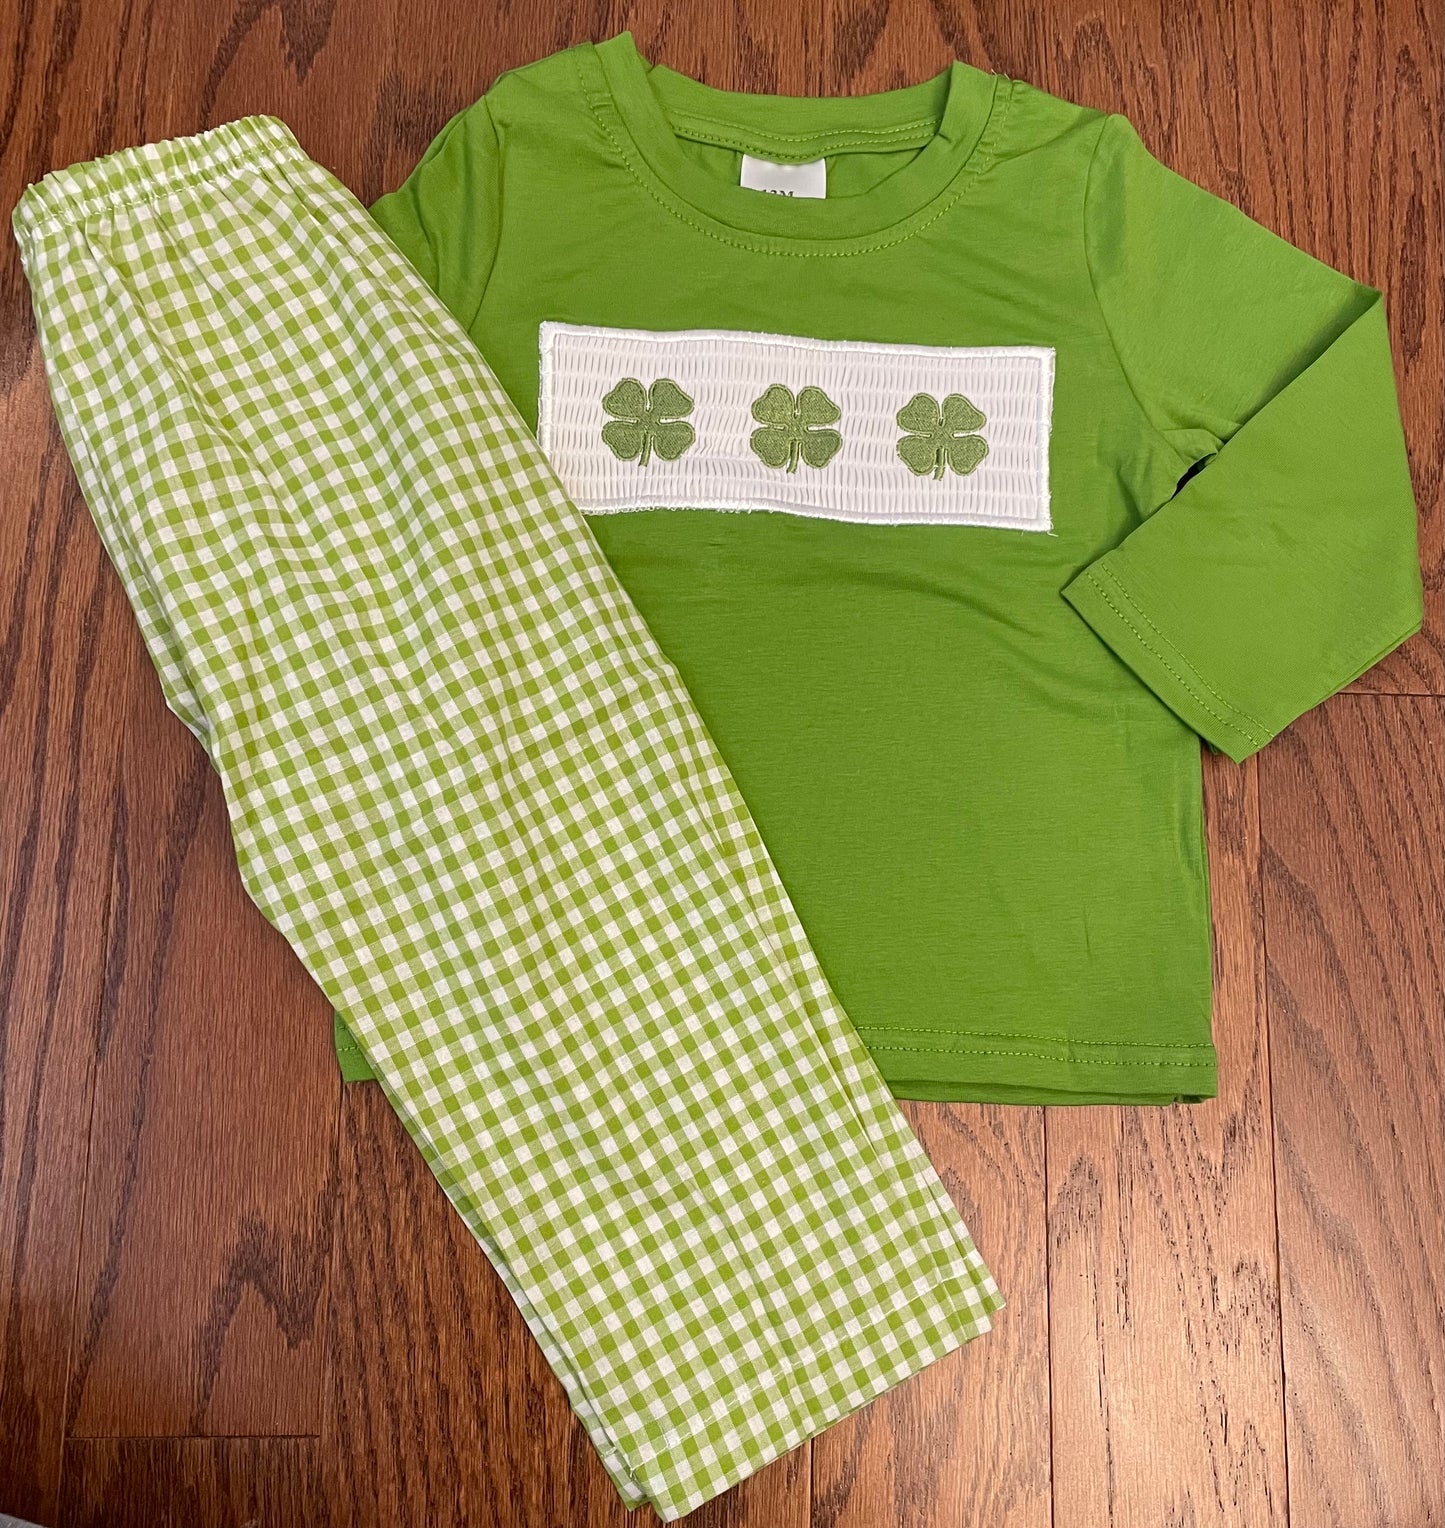 Embroidered Clover Boys Pant set